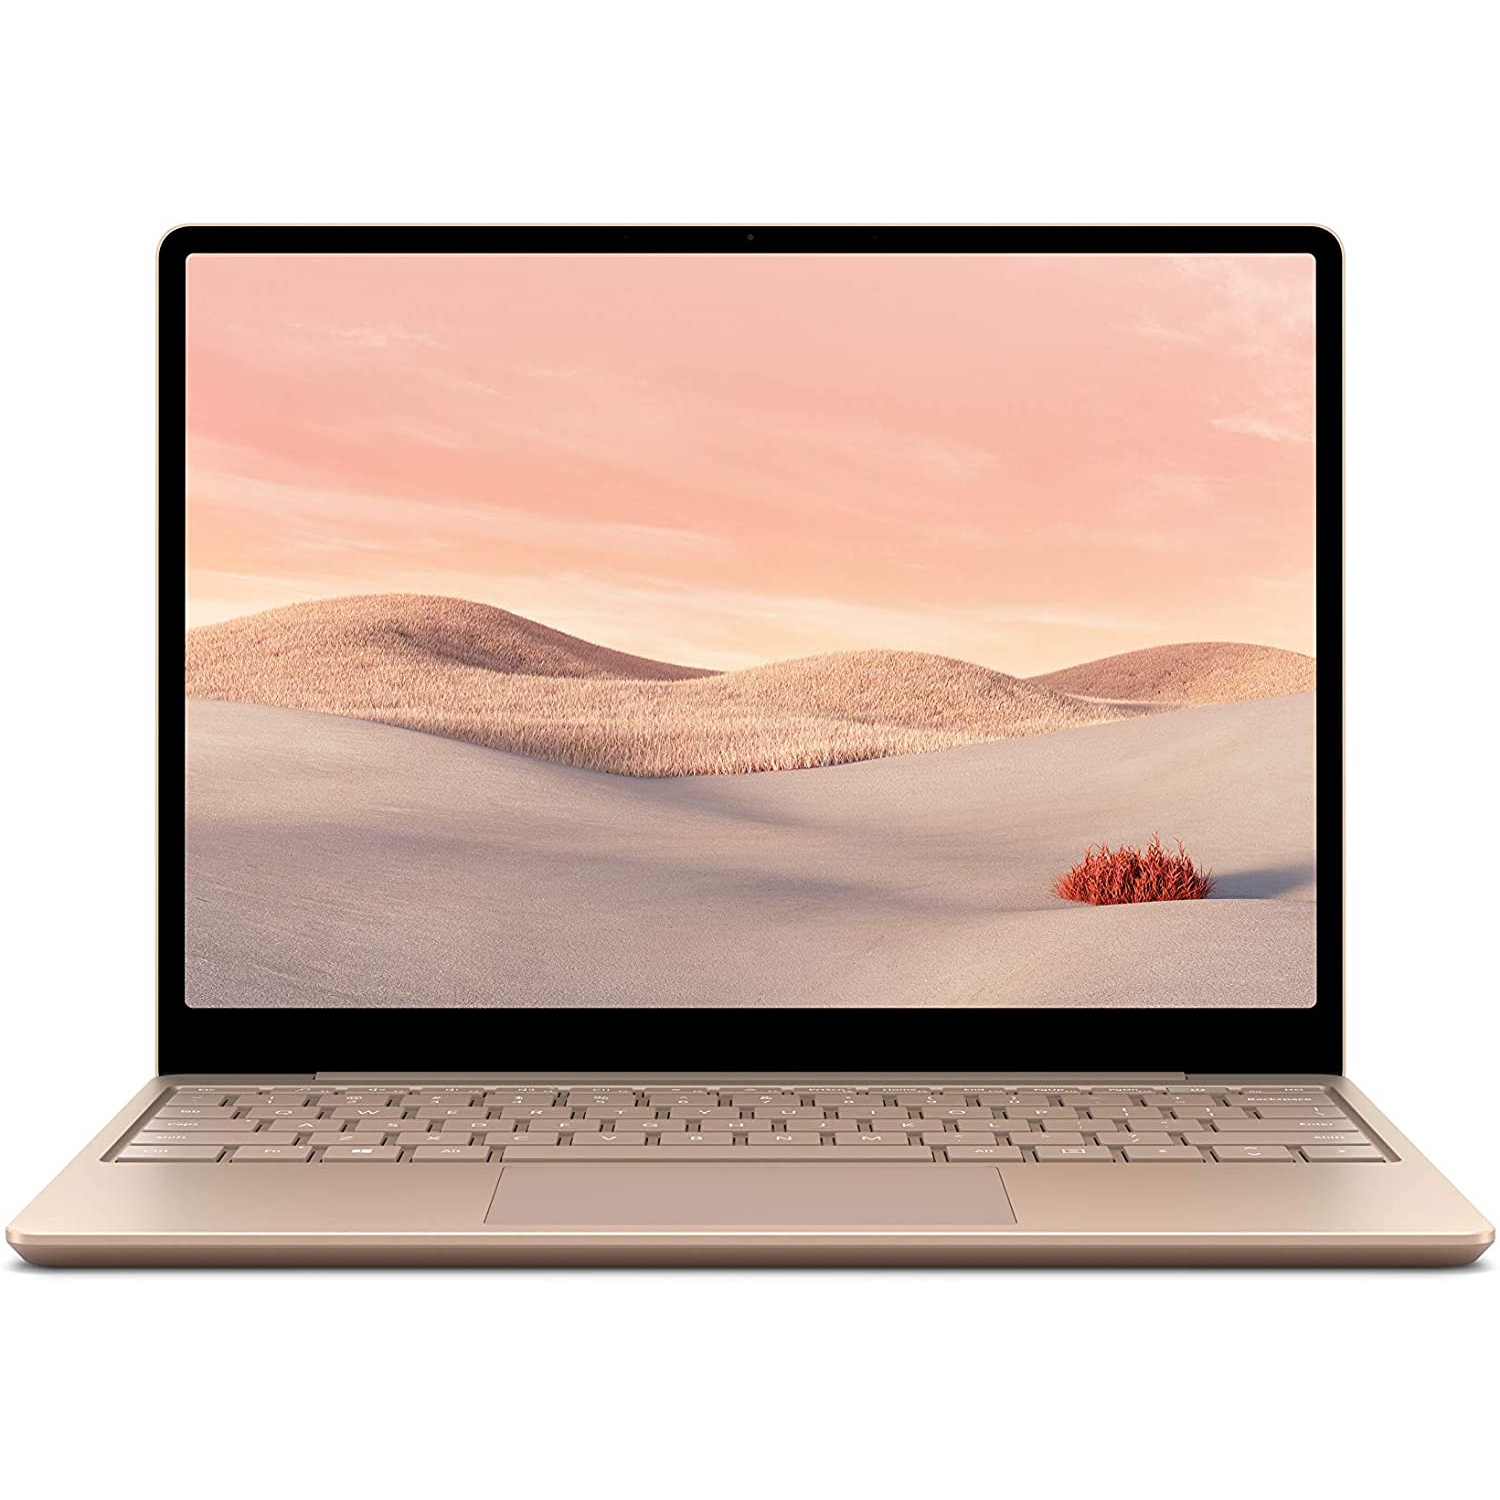 Refurbished (Excellent) - Microsoft Surface Laptop Go 12.4" Multi-Touch - Intel Core i5, 8GB RAM, 128GB SSD, Windows 10 Home in S Mode - Sand Stone - Certified Refurbished